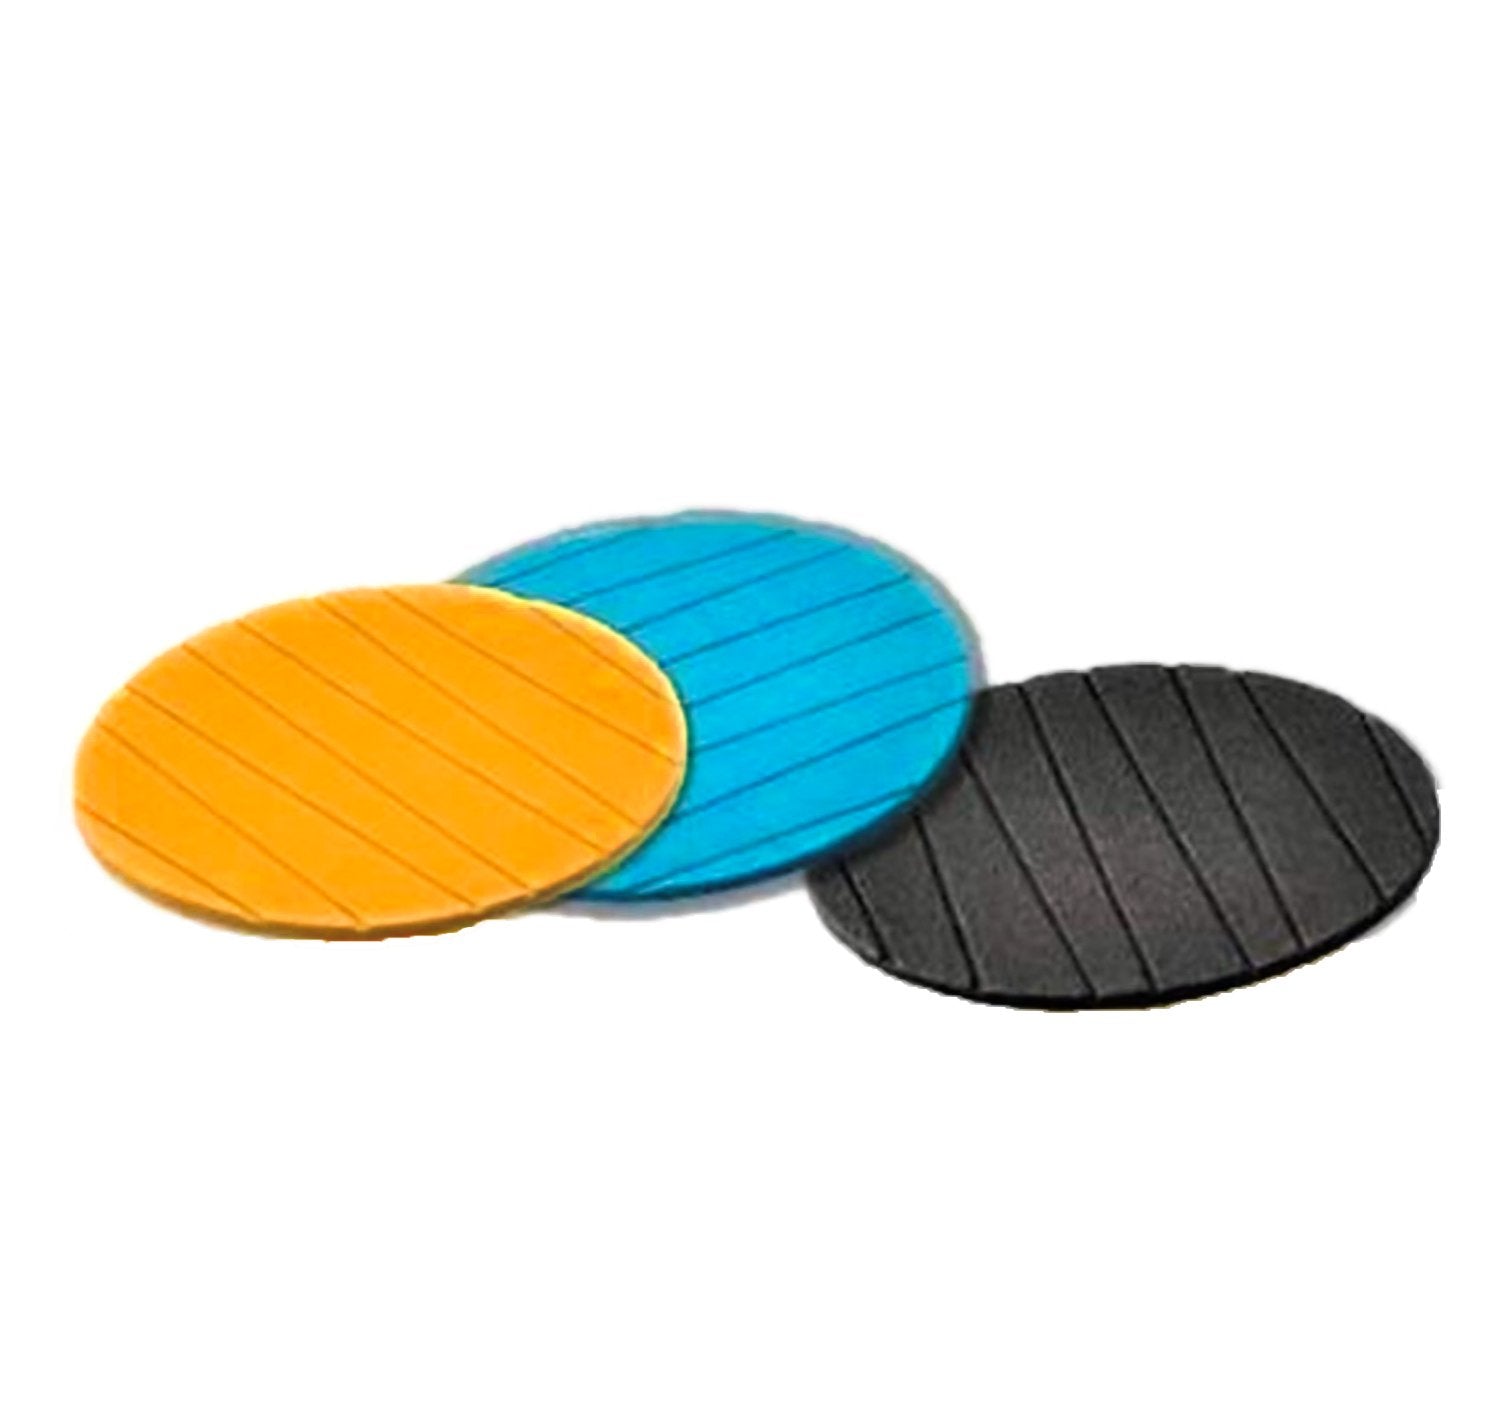 2127 Coasters Round Heat Resistant Pads Flexible for Home Kitchen Tools Tableware (3 pack) - SkyShopy